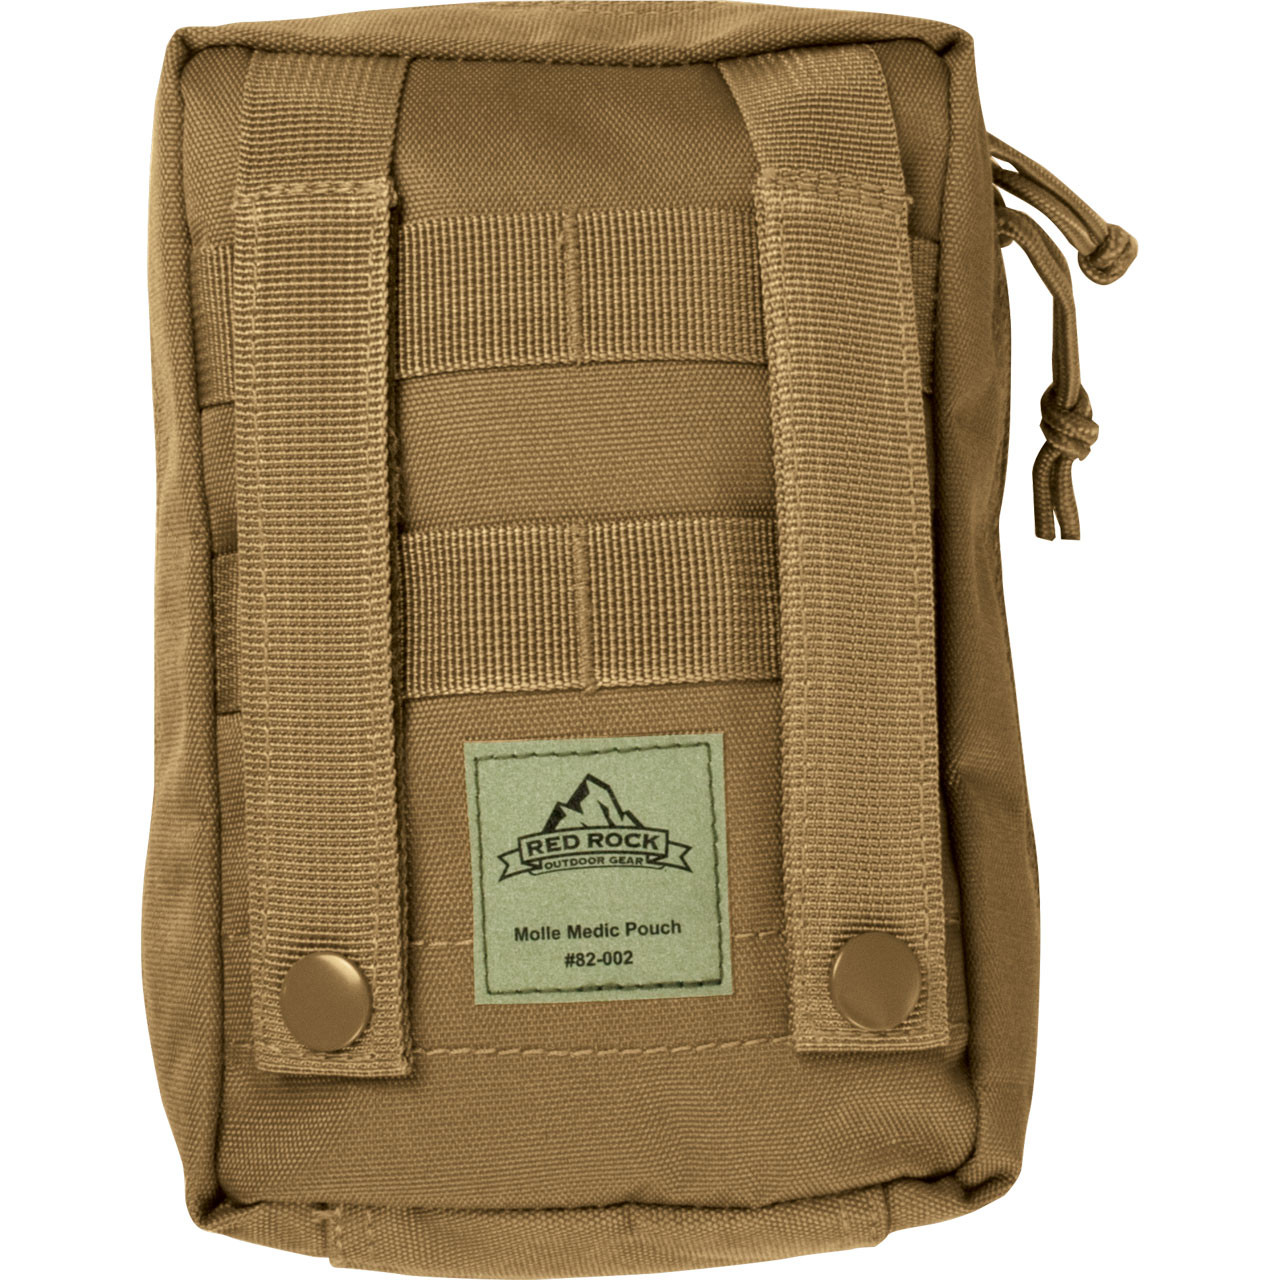 Large MOLLE Medic Pouch - Coyote - Back